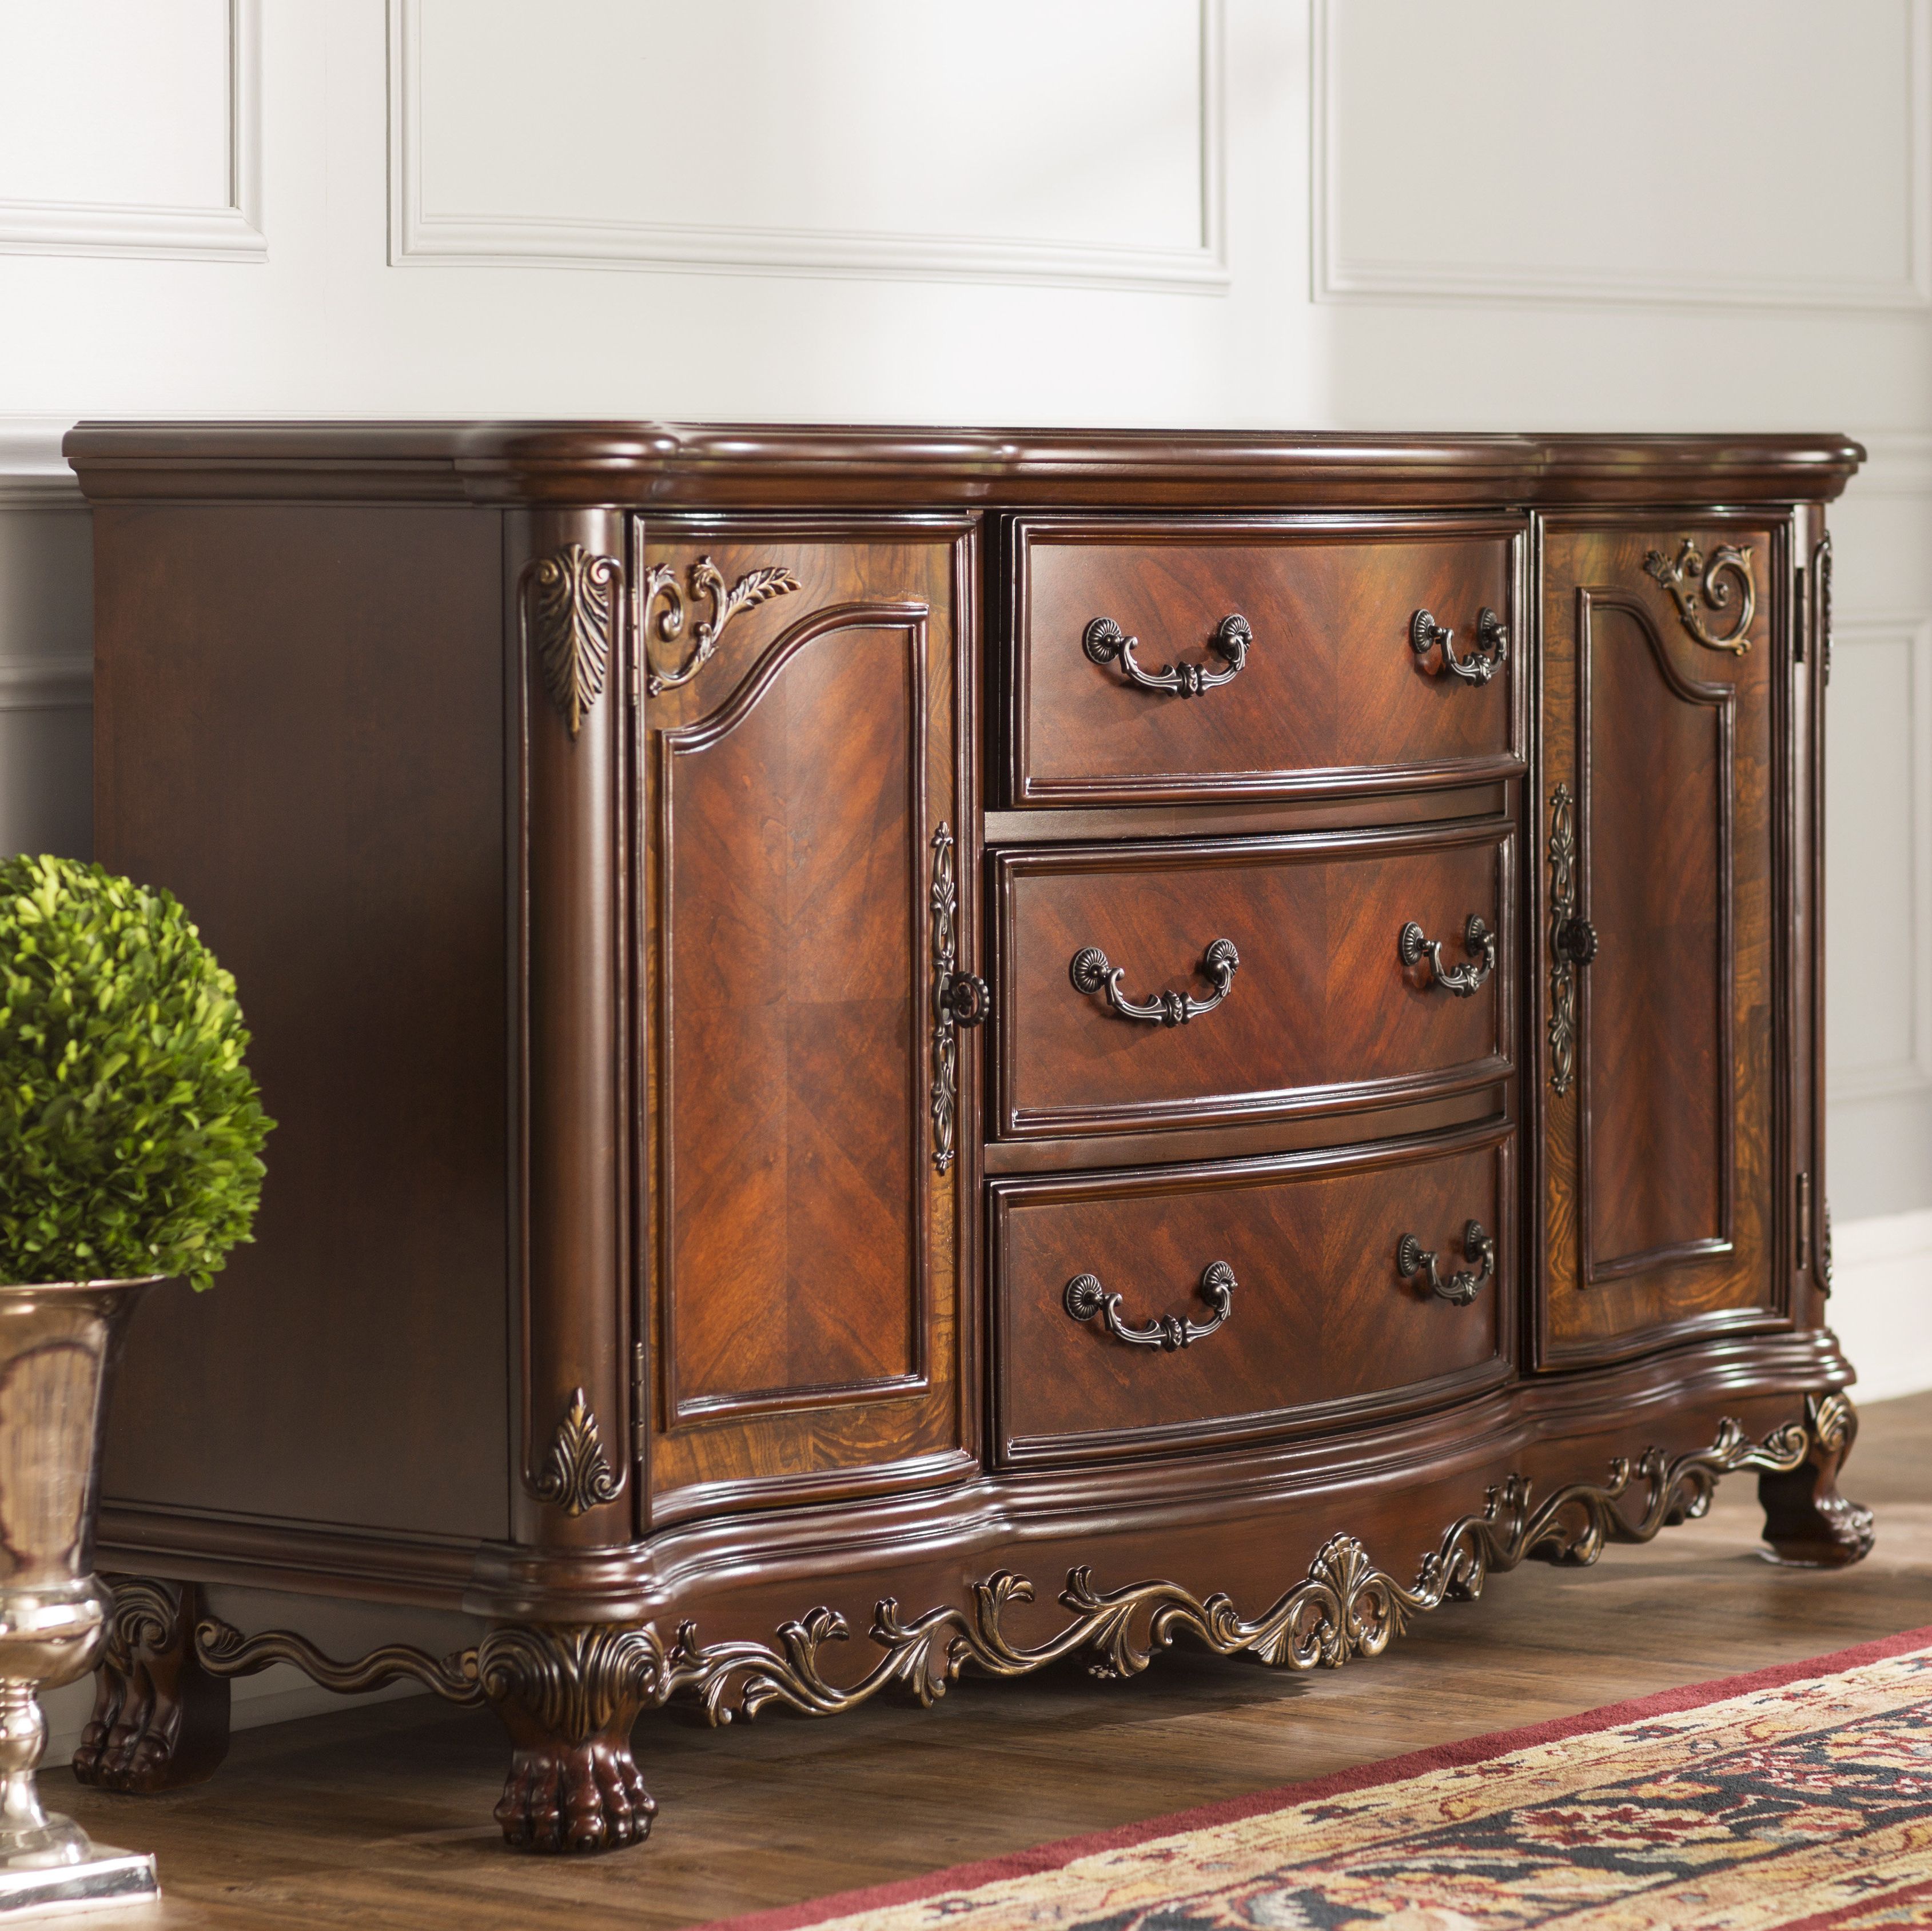 Chalus Sideboard Pertaining To Shoreland Sideboards (View 14 of 20)